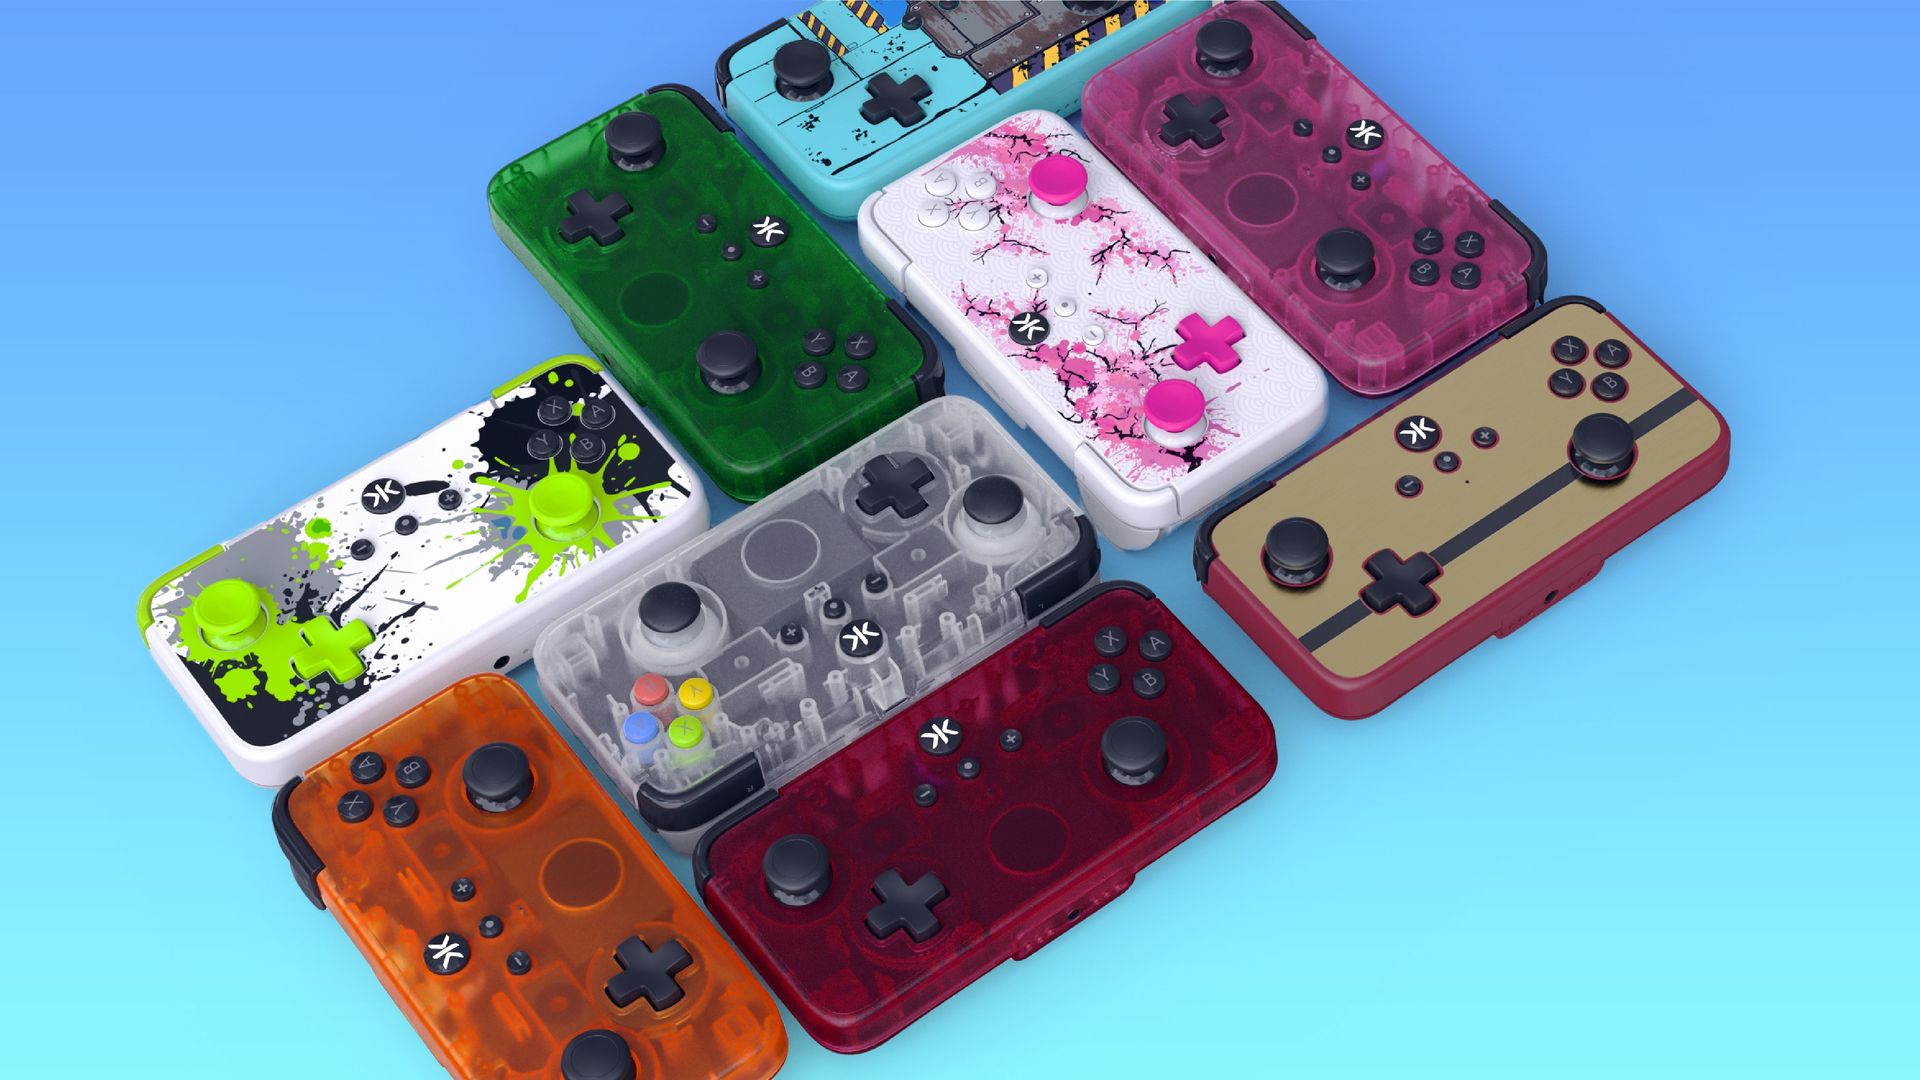 crkd follows nitro deck with nes-style retro controllers for mobile